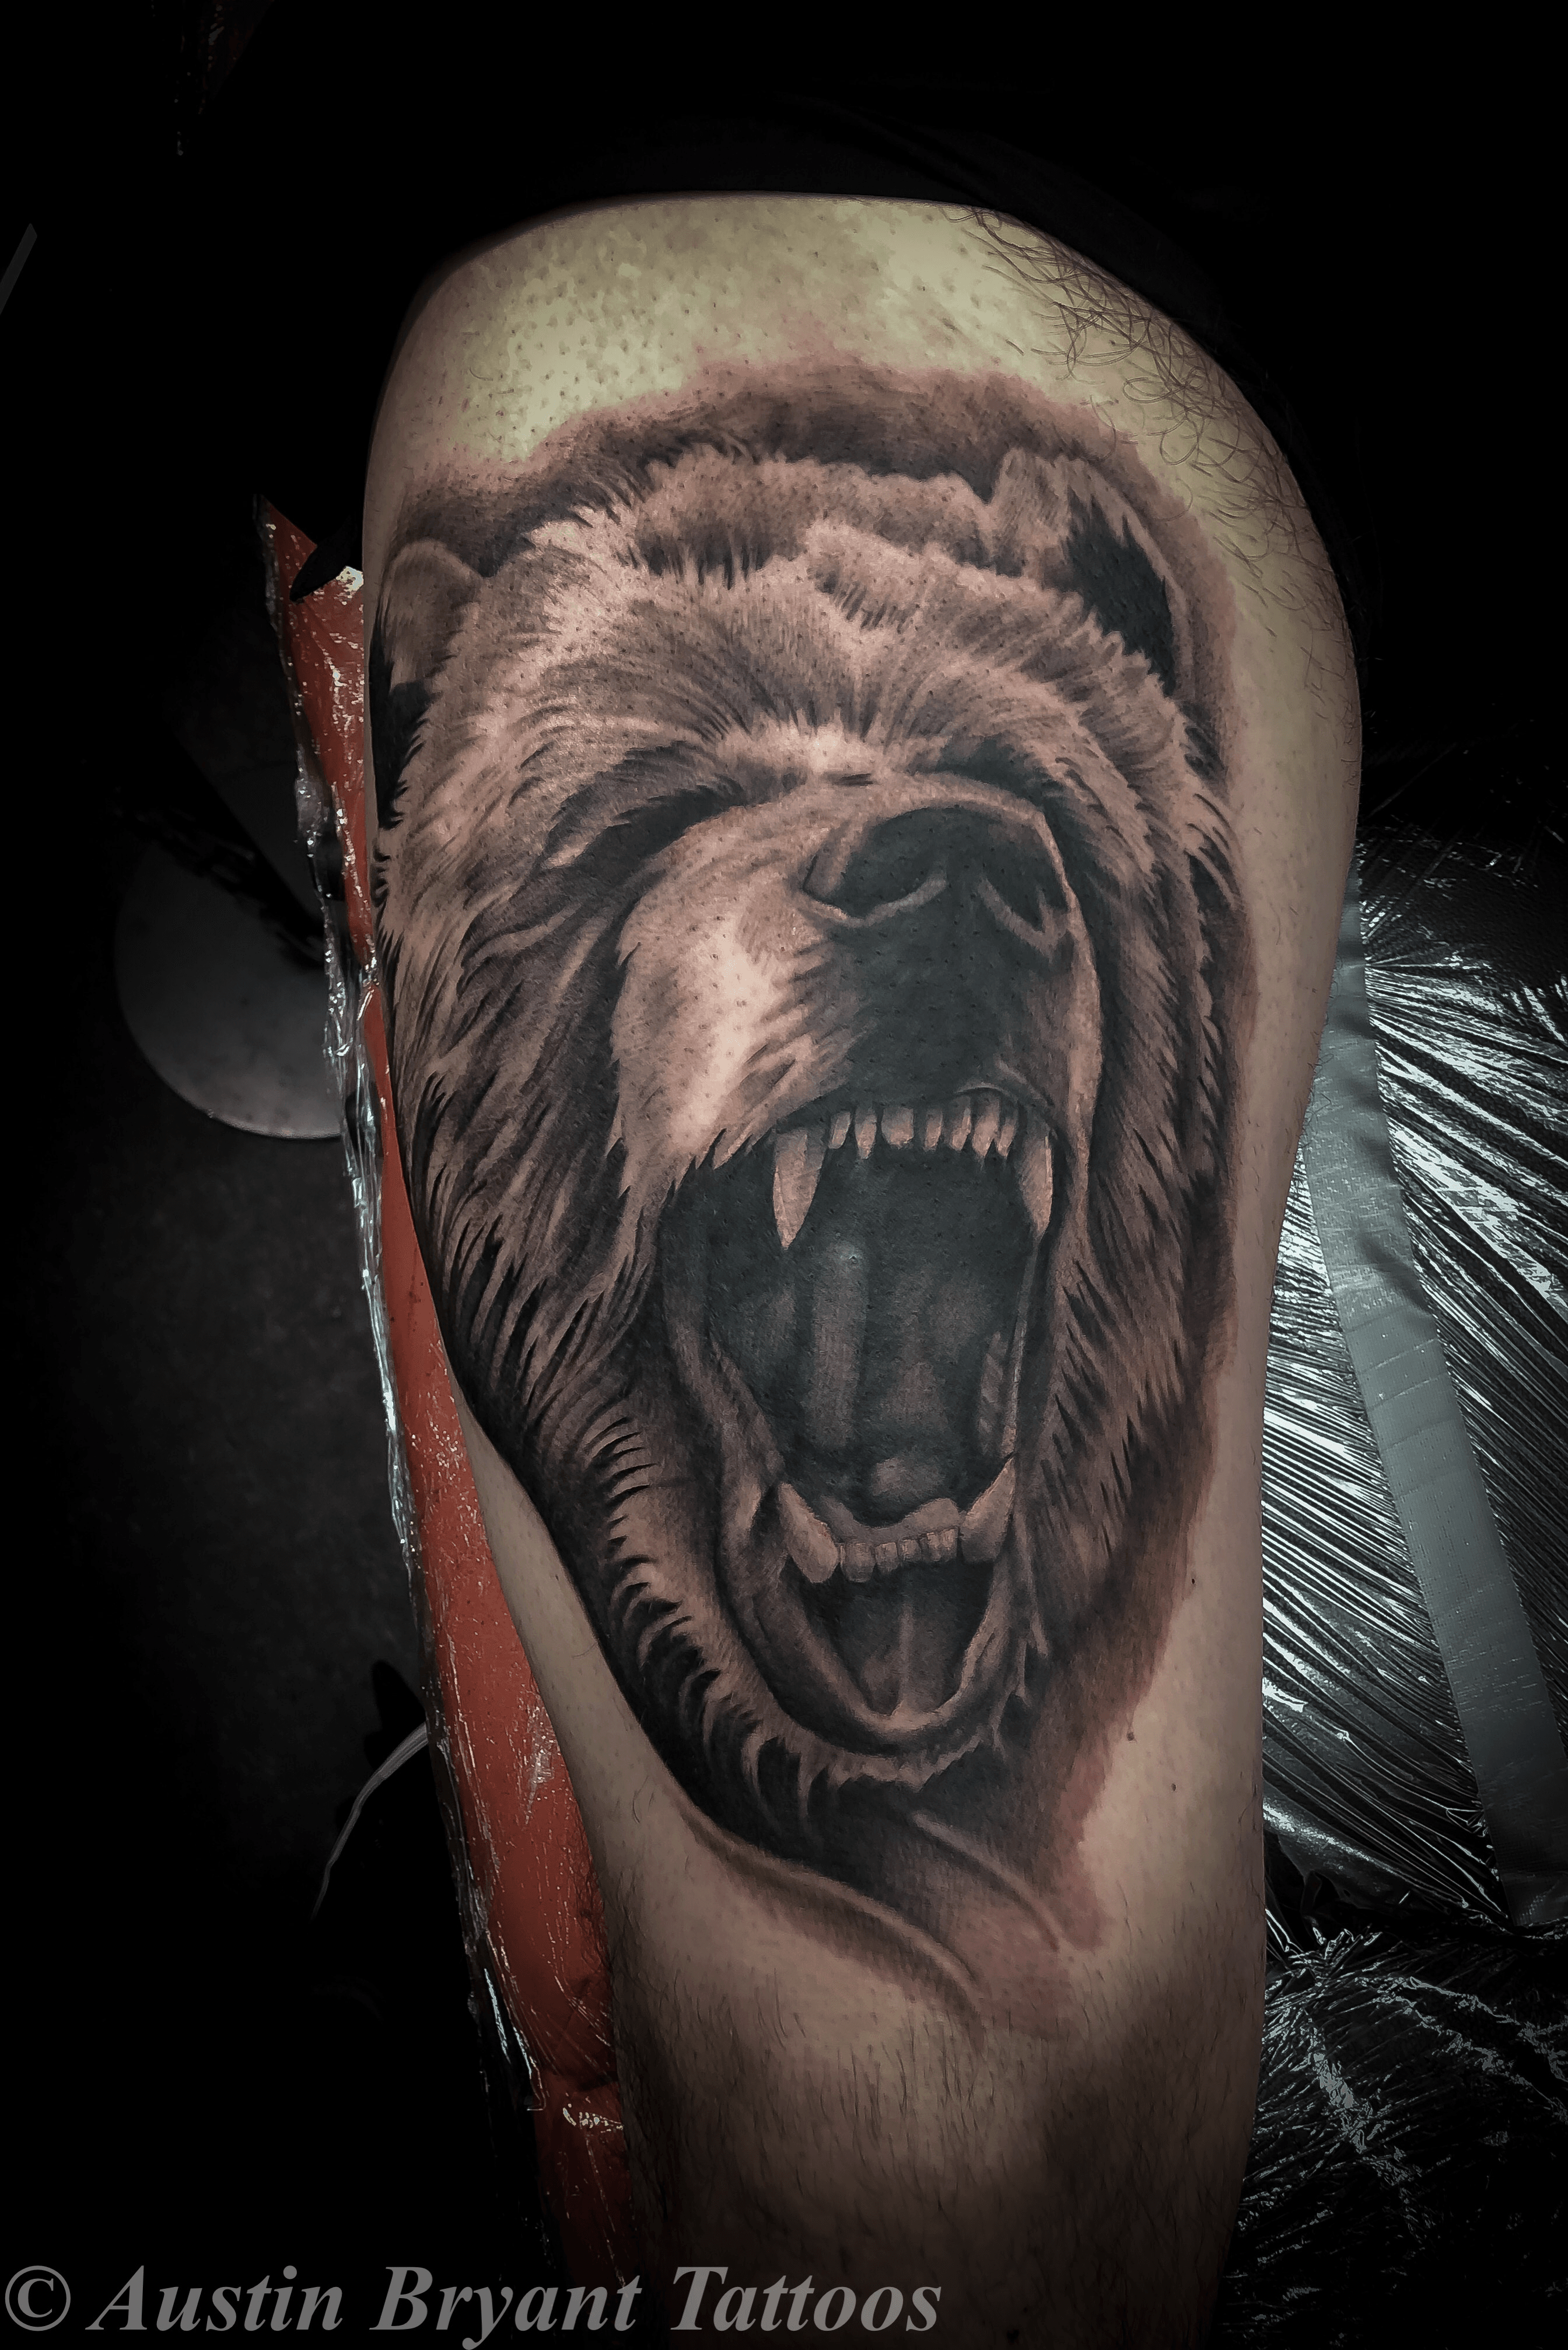 Grizzly Bear Tattoo Meaning The Majestic Symbolism of Grizzly Bear Tattoos   Impeccable Nest